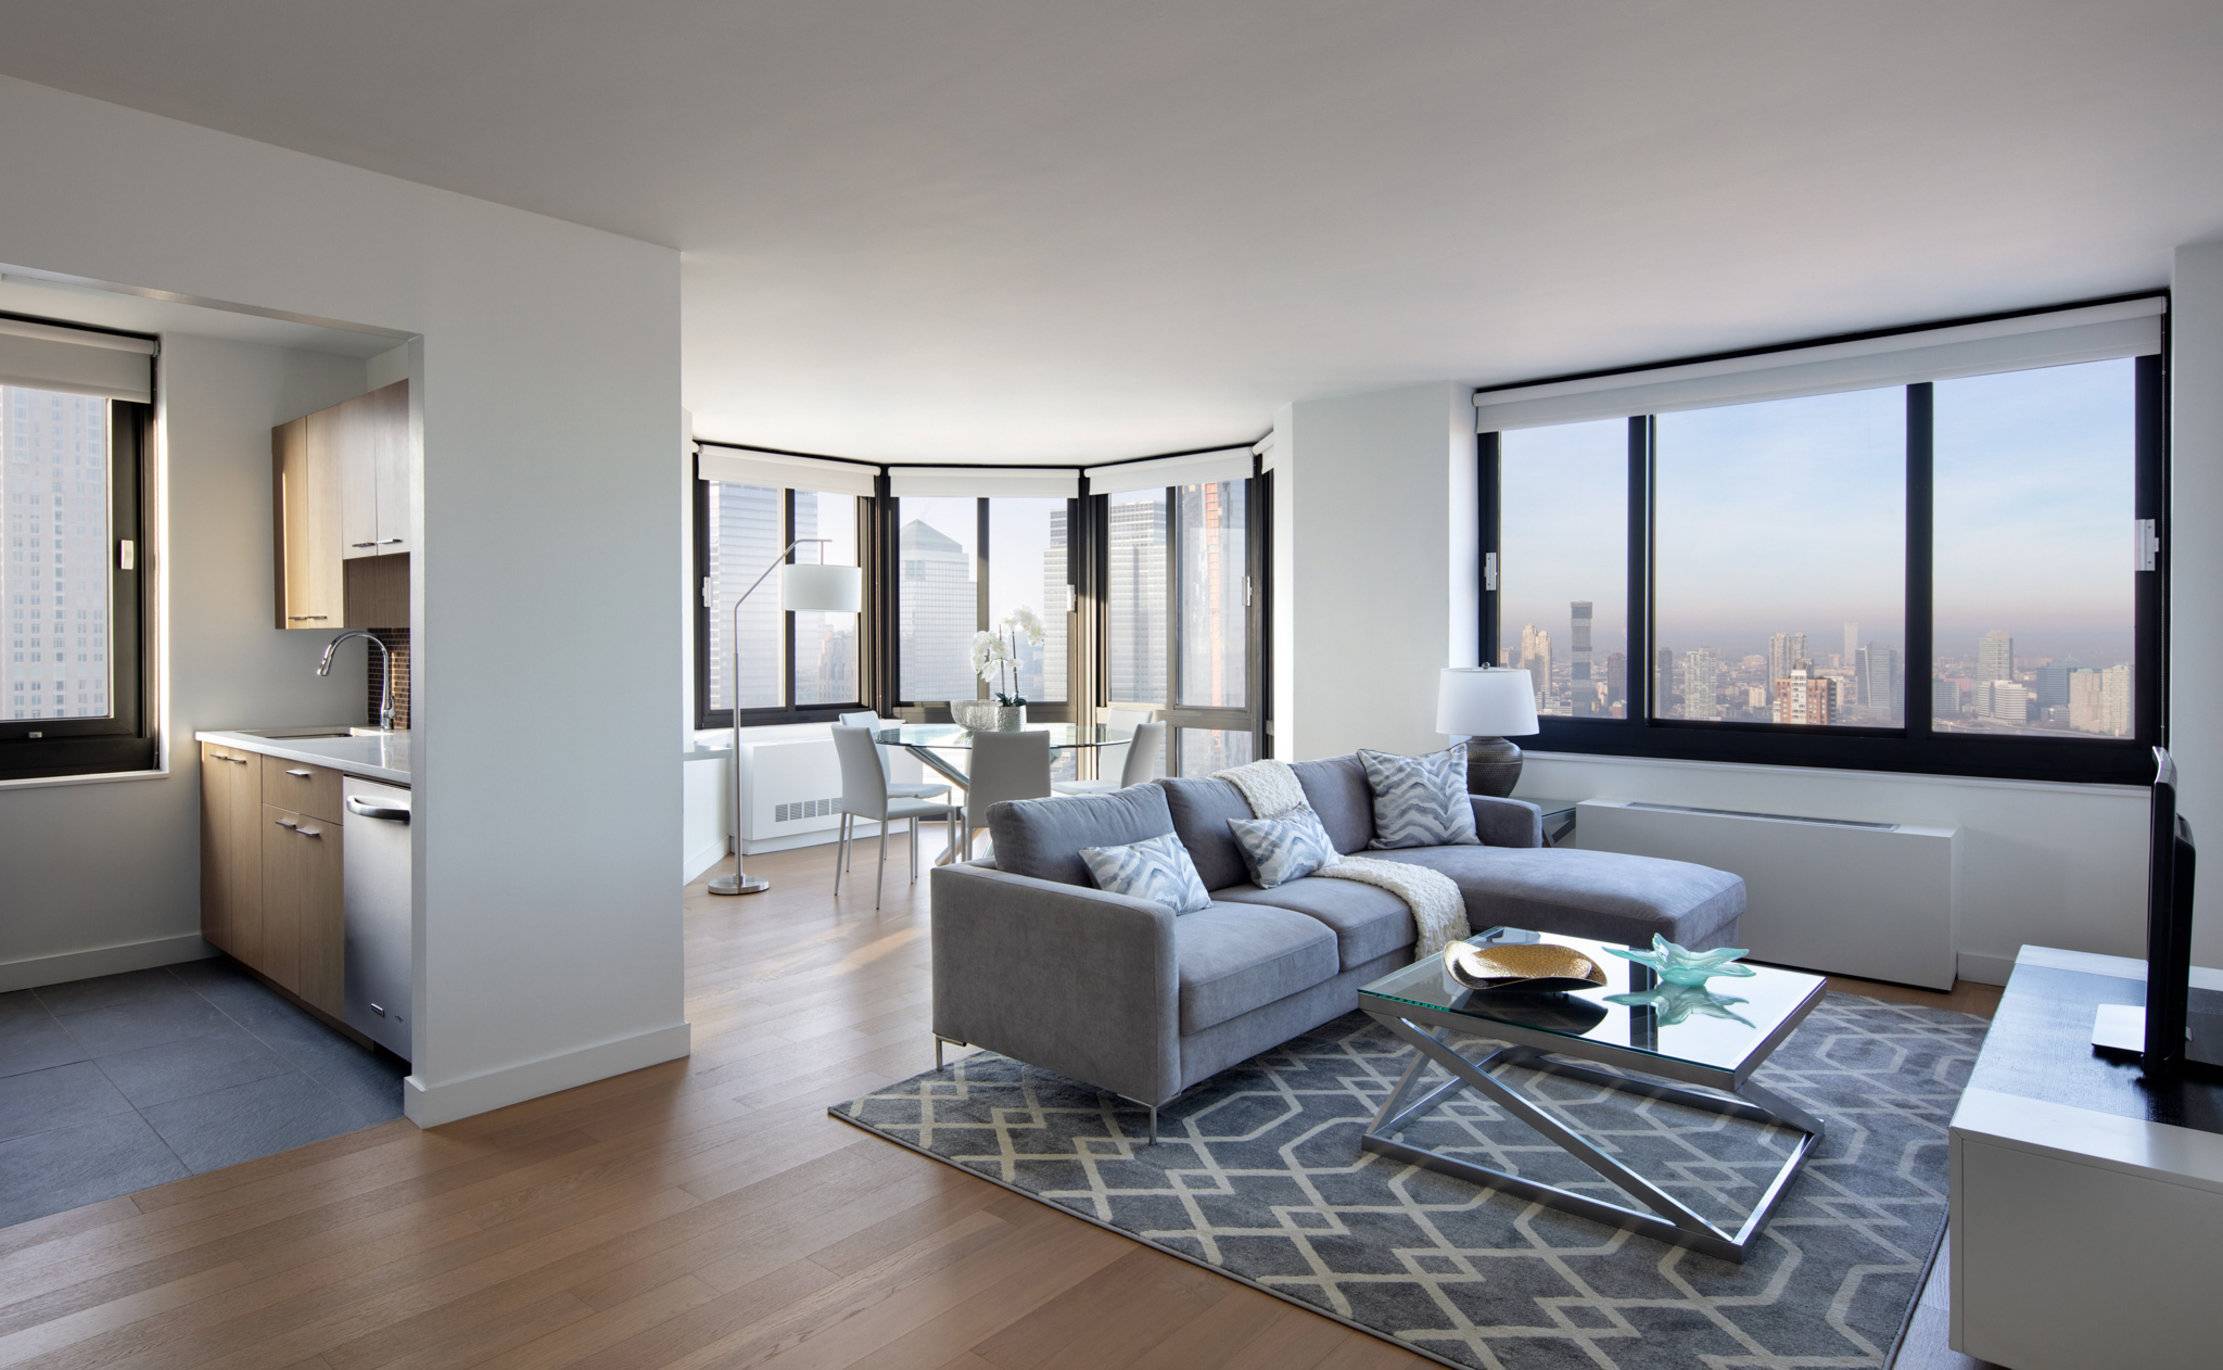 TRIBECA PENTHOUSE - 3 BEDROOM HOME WITH NATURAL LIGHT AND EXQUISITE KITCHEN